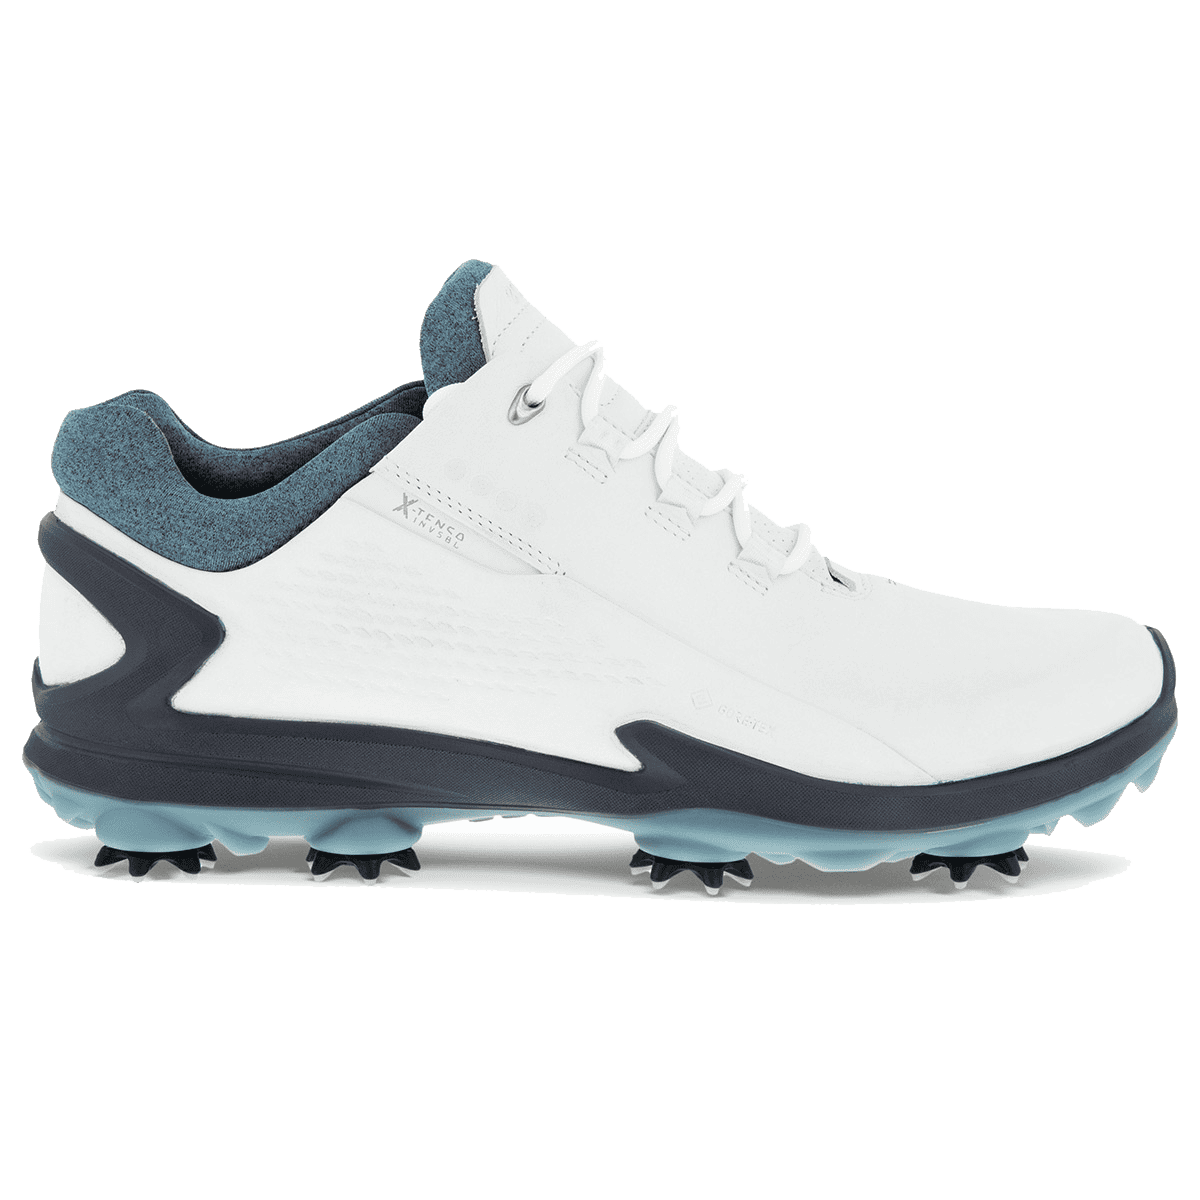 The best golf shoes for Plantar Fasciitis - National Club Golfer